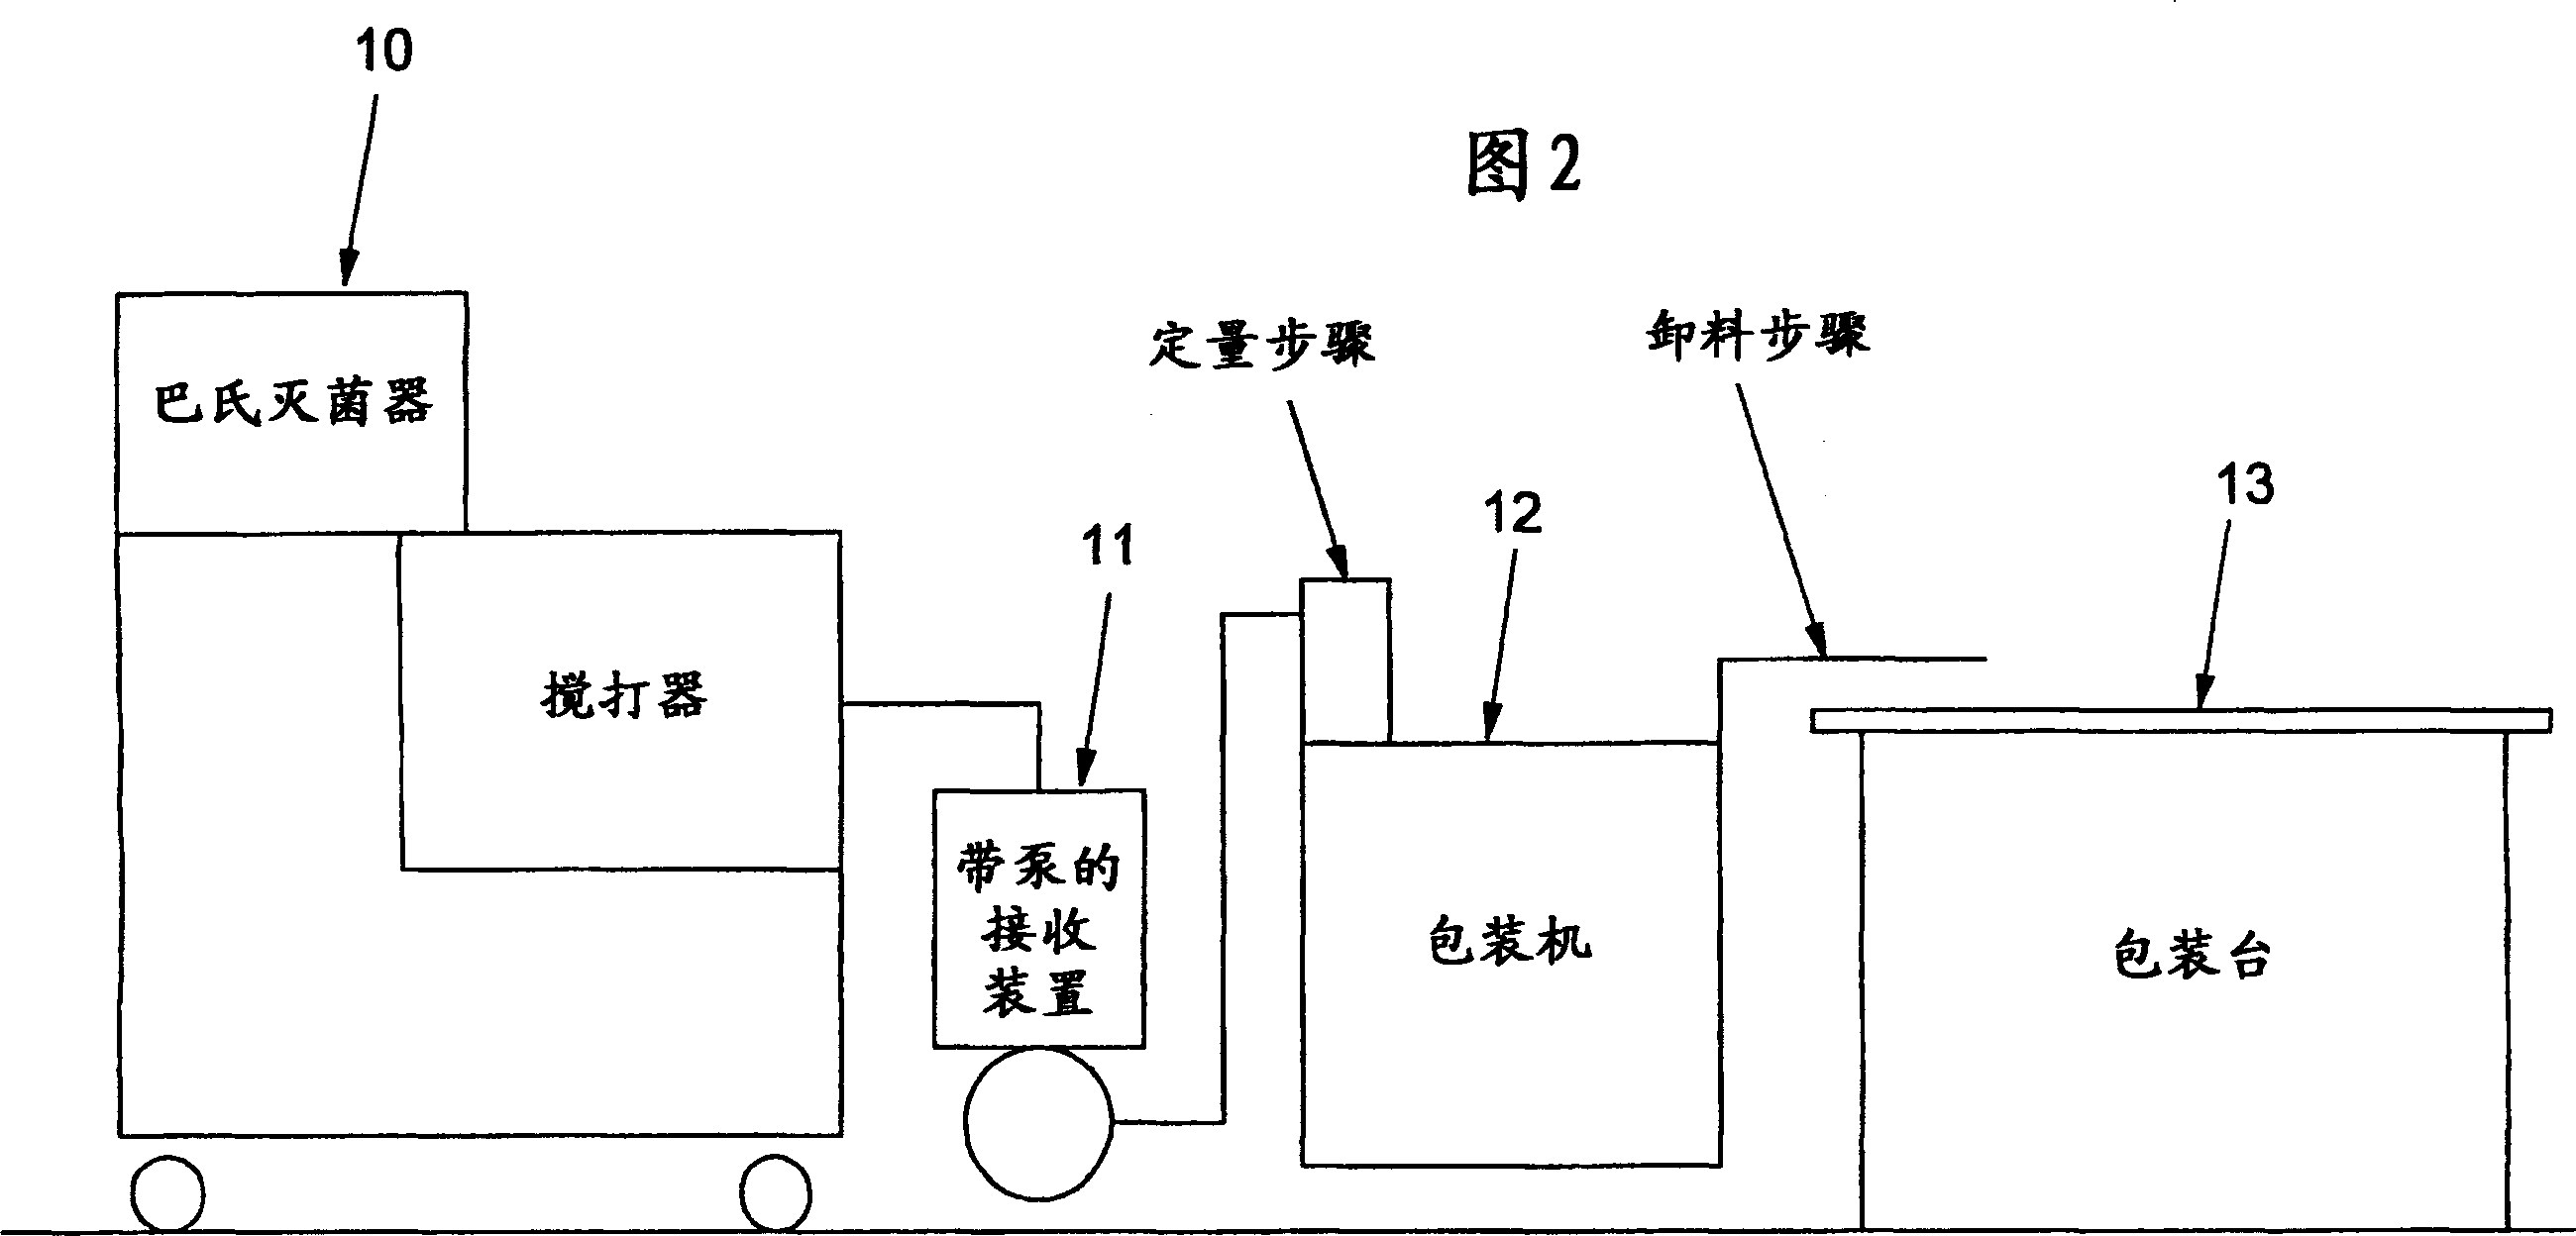 Process and plant for the production of sealed packages of homemade-style ice cream